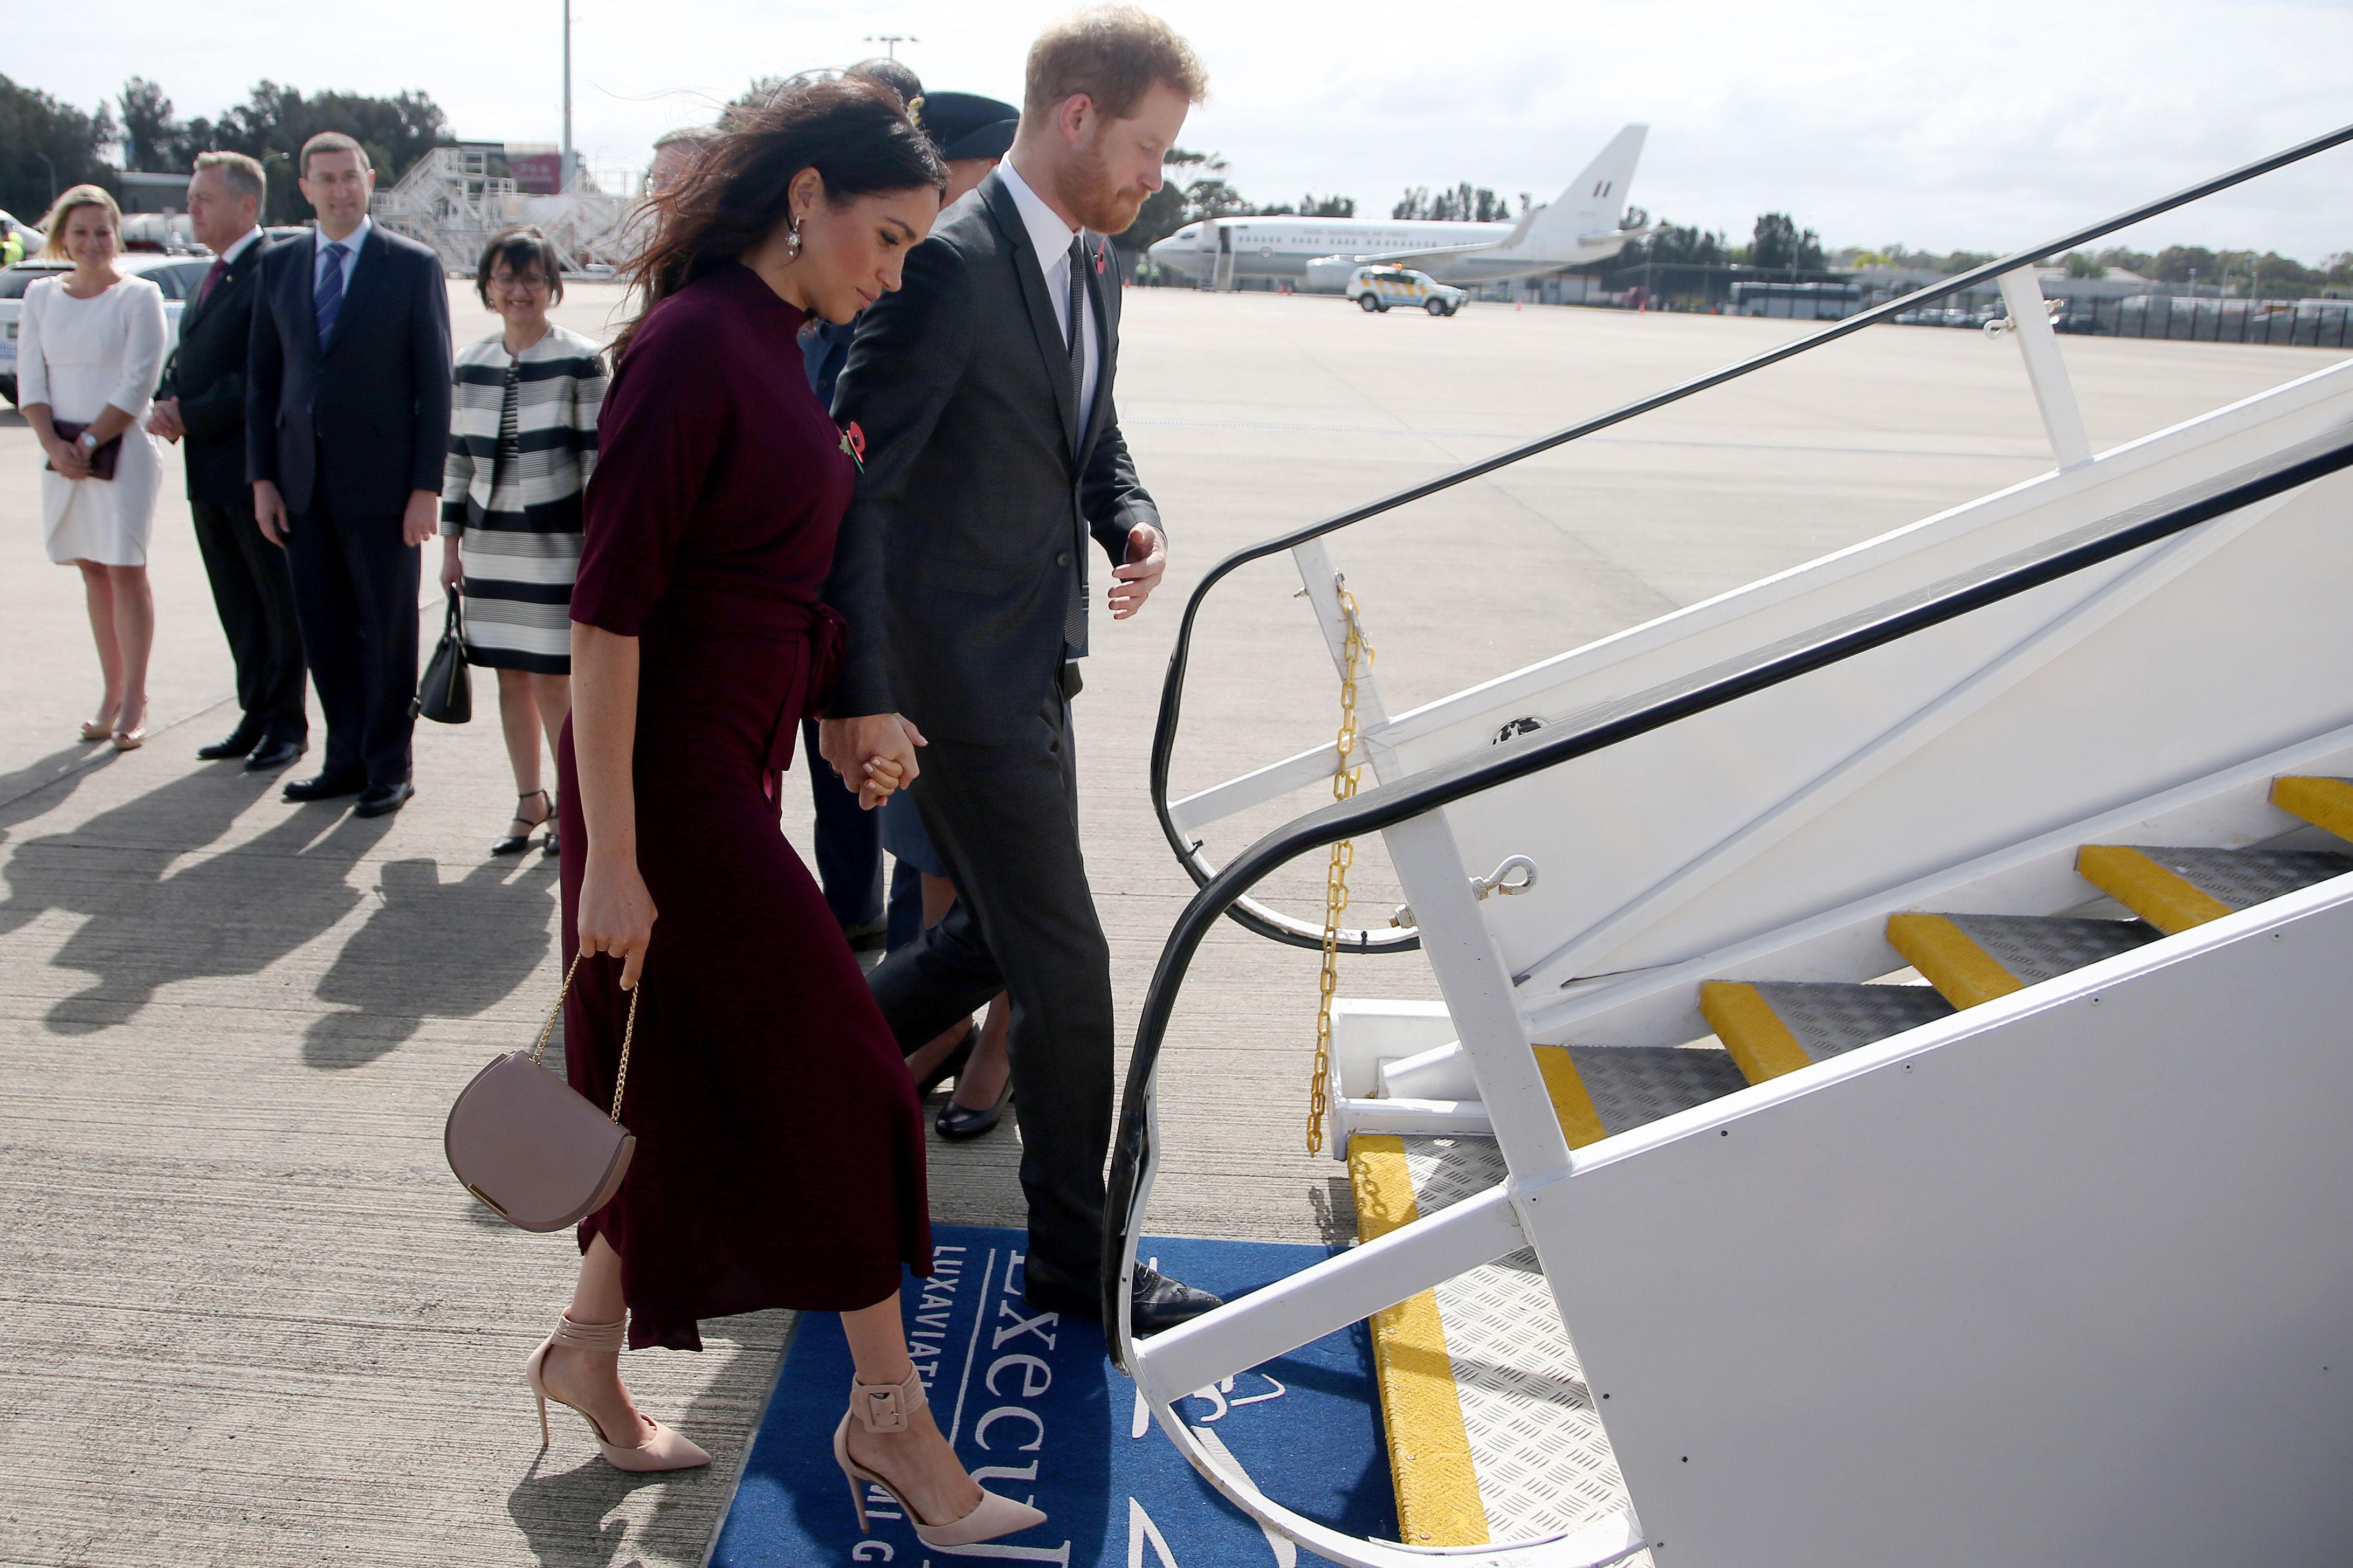 Meghan Markle and Prince Harry board a plane for New Zealand from Sydney airport on October 28, 2018 | Source: Getty Images